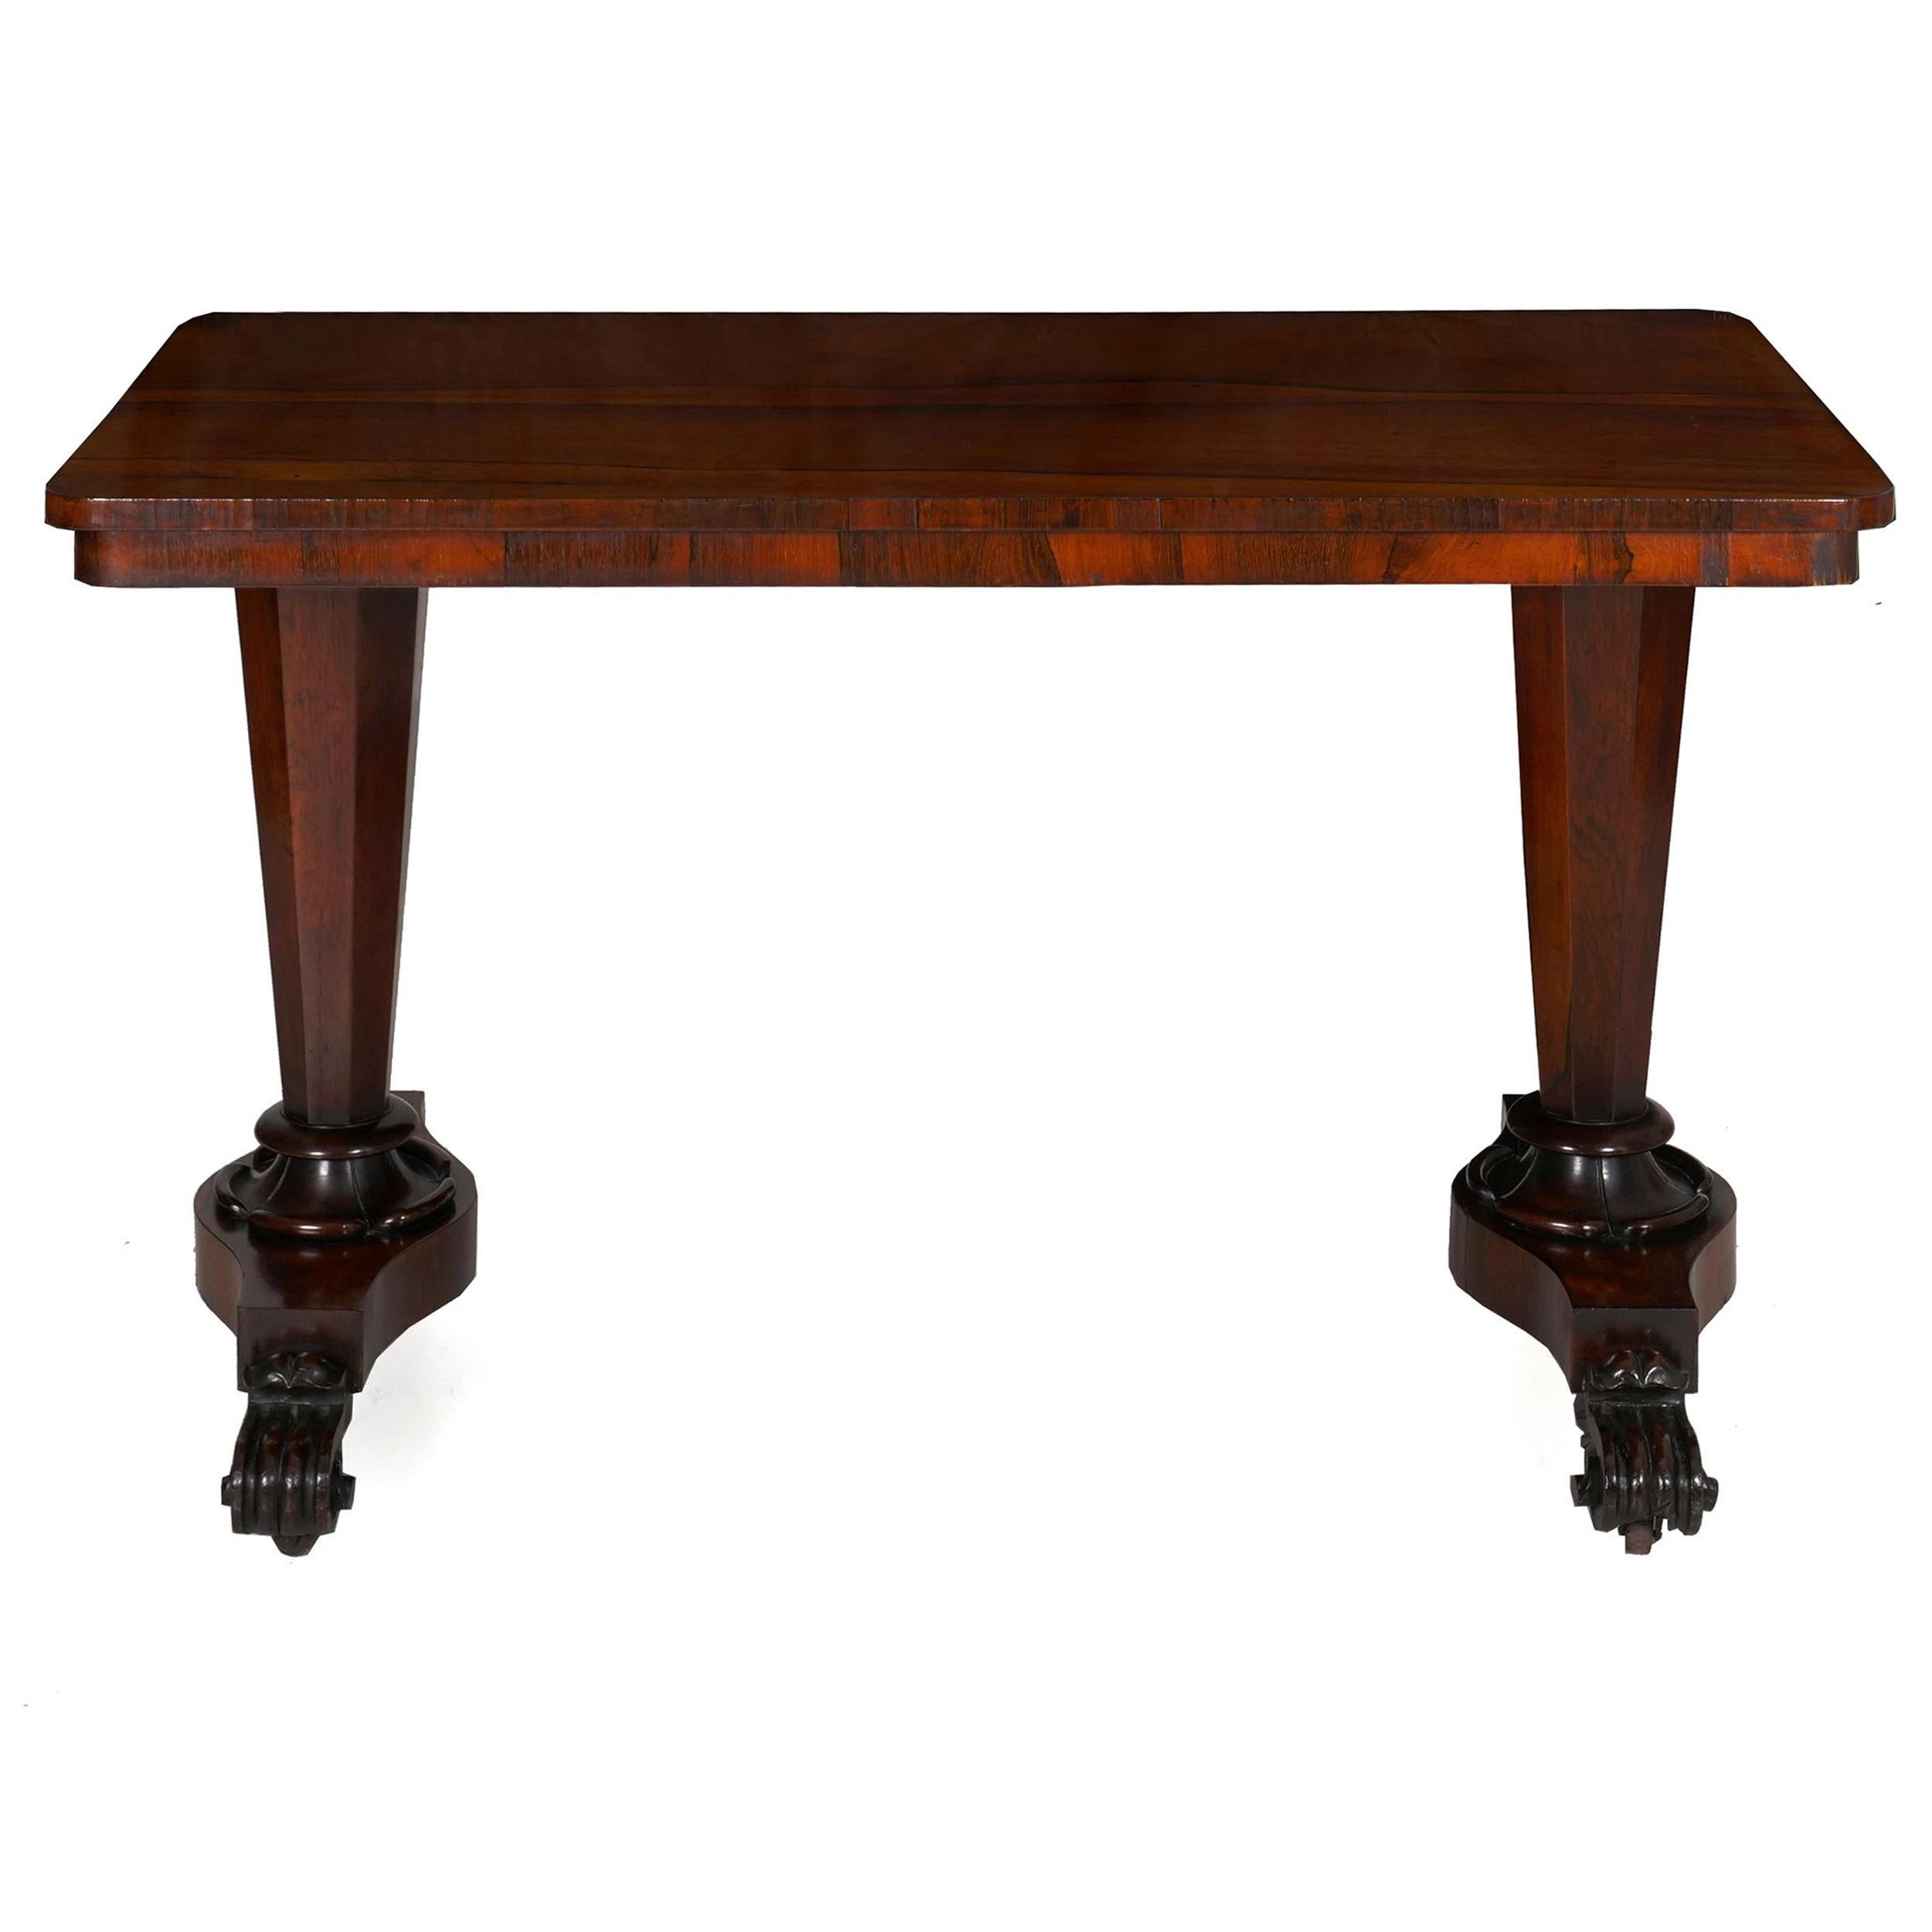 William IV rosewood library table
England, circa 1840
Item # 010EFL06K 

A fine William IV period library table from England circa the second quarter of the 19th century, it is dressed in chaotic and exotic rosewood ebony veneers throughout that